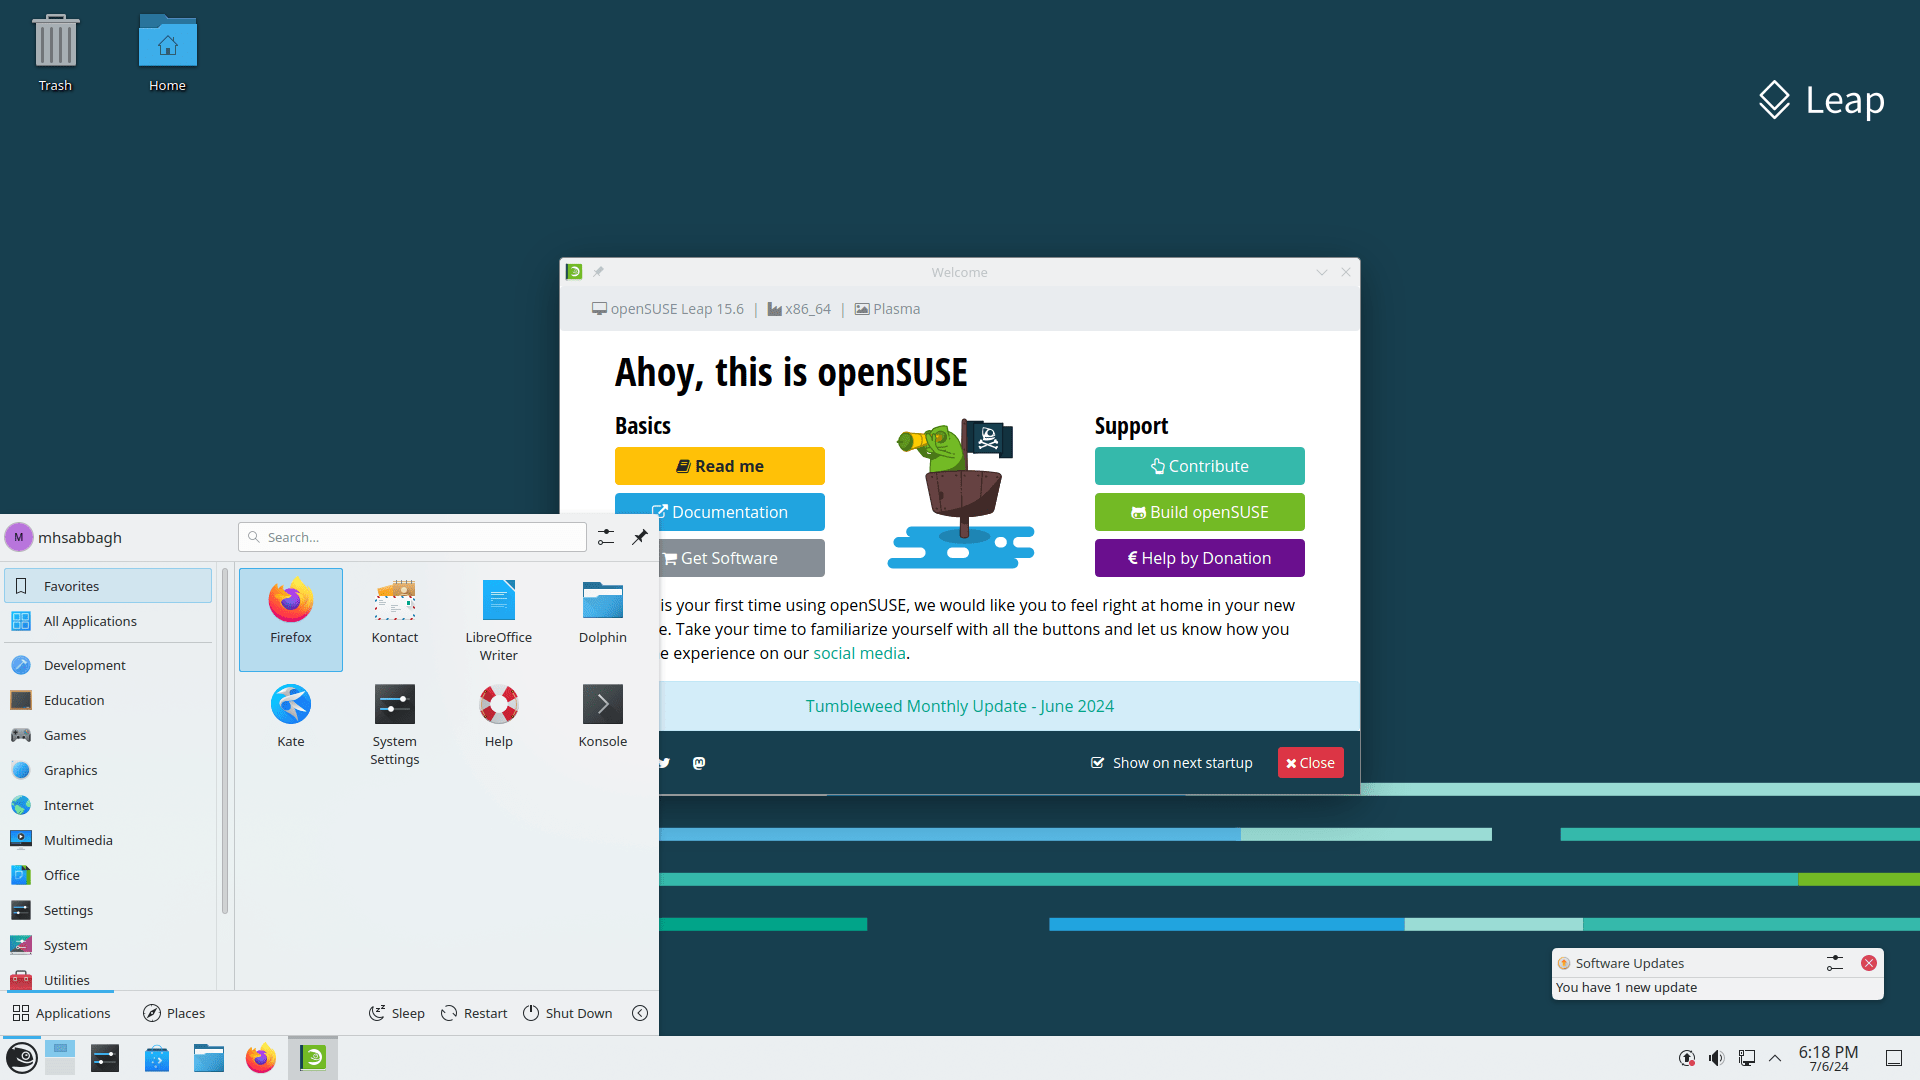 openSUSE Leap 15.6 1